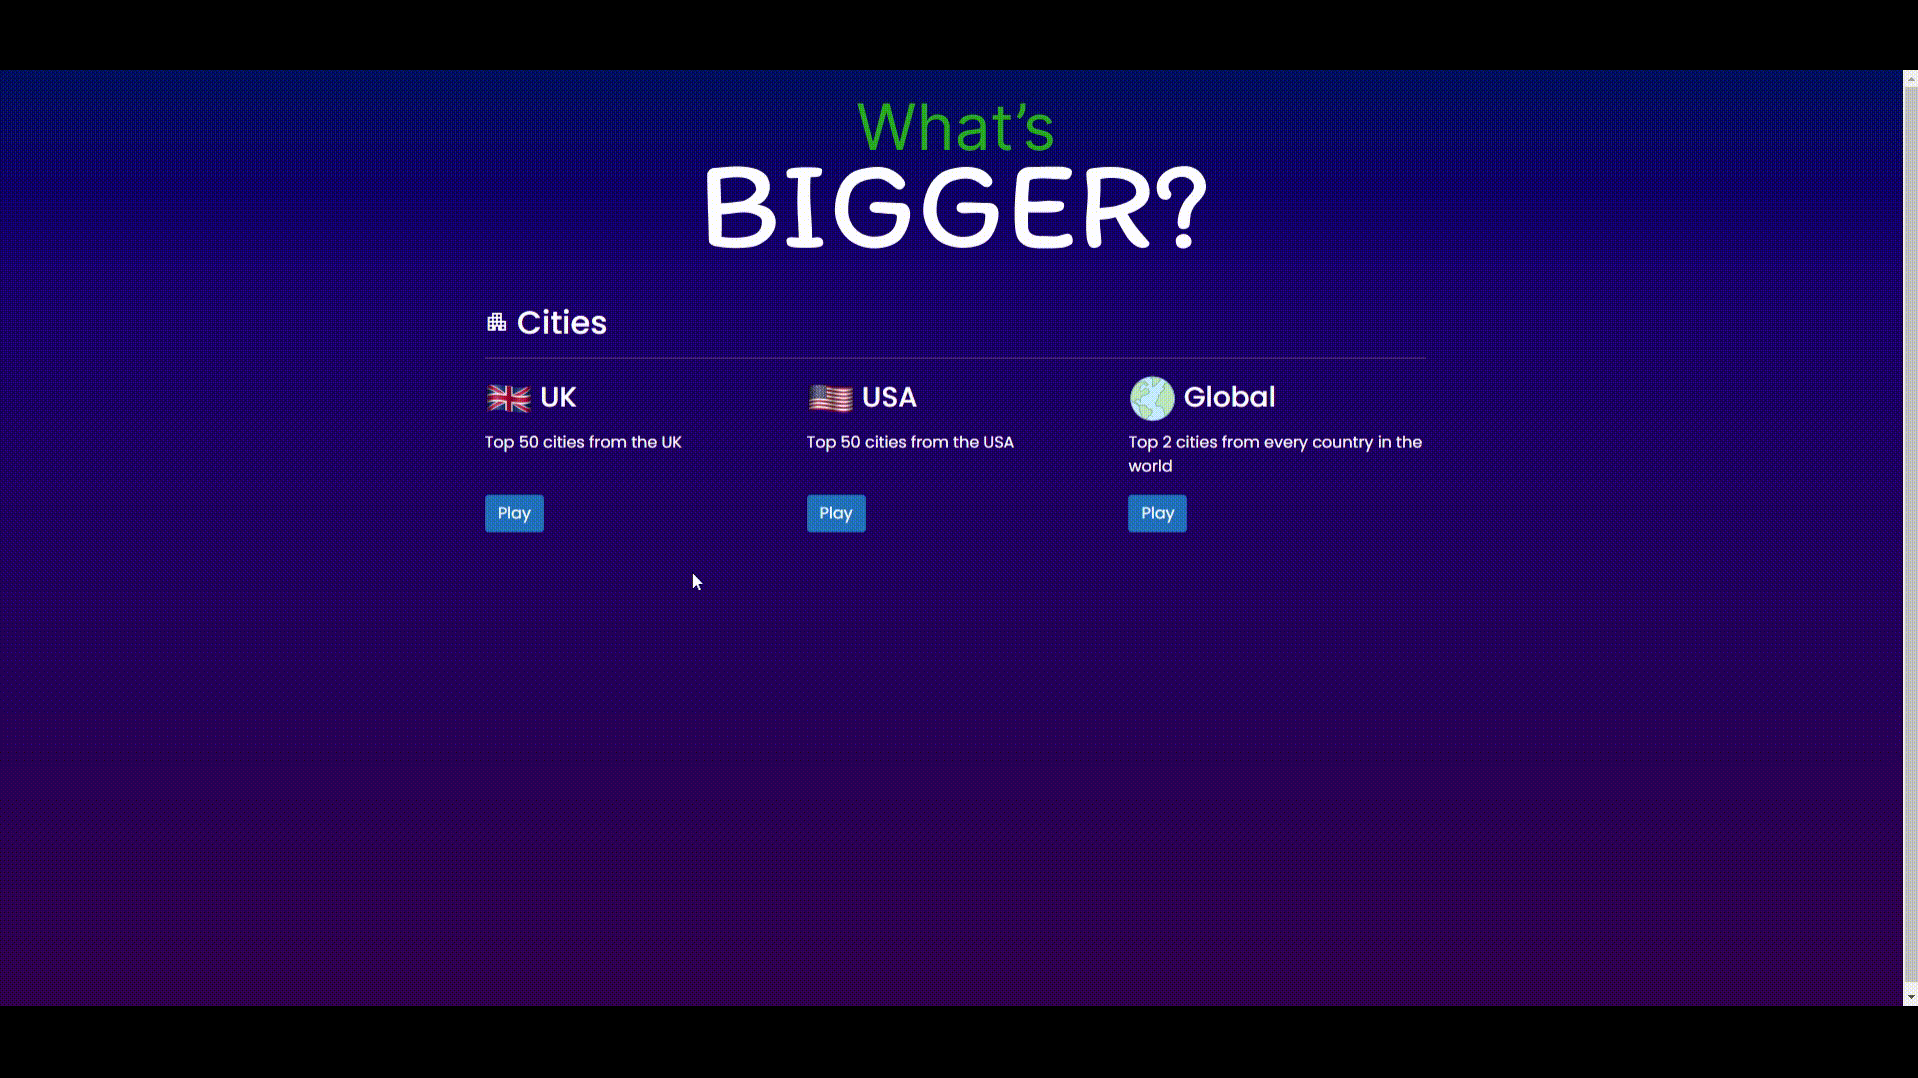 A playthrough of the whats bigger trivia game written in Blazor